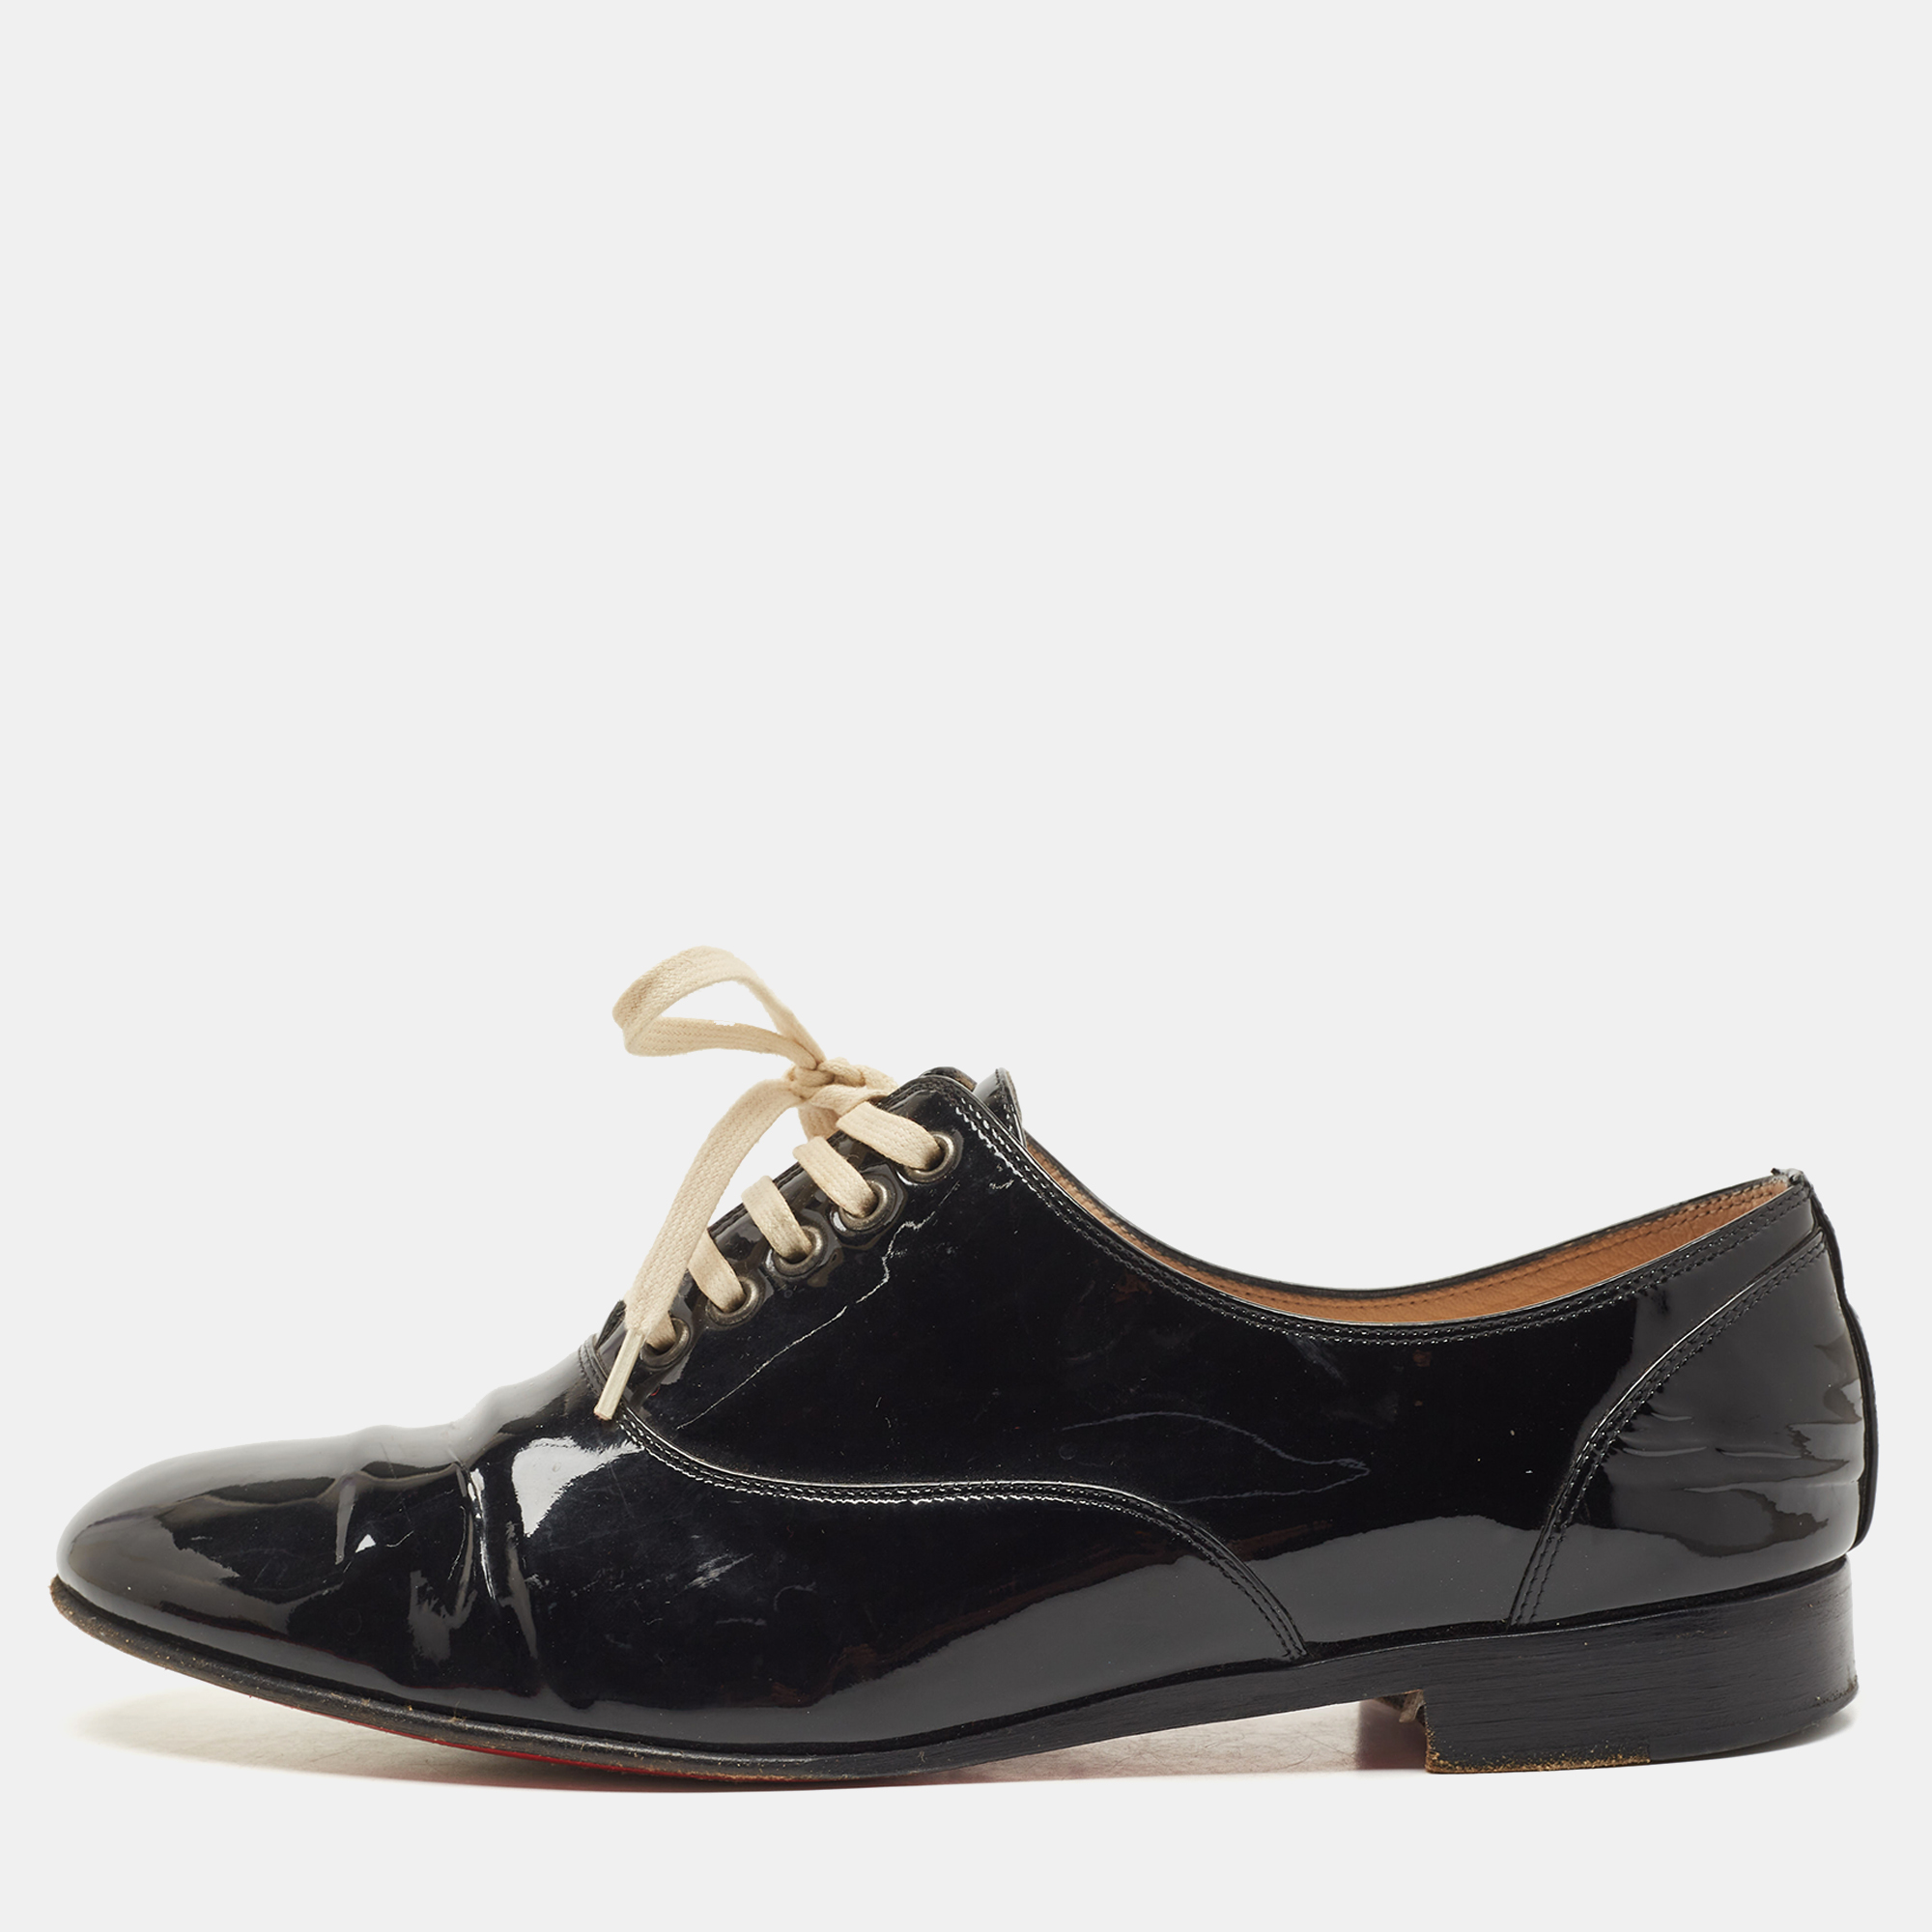 Christian Louboutin Black Patent Leather Fred Oxfords Size 37.5